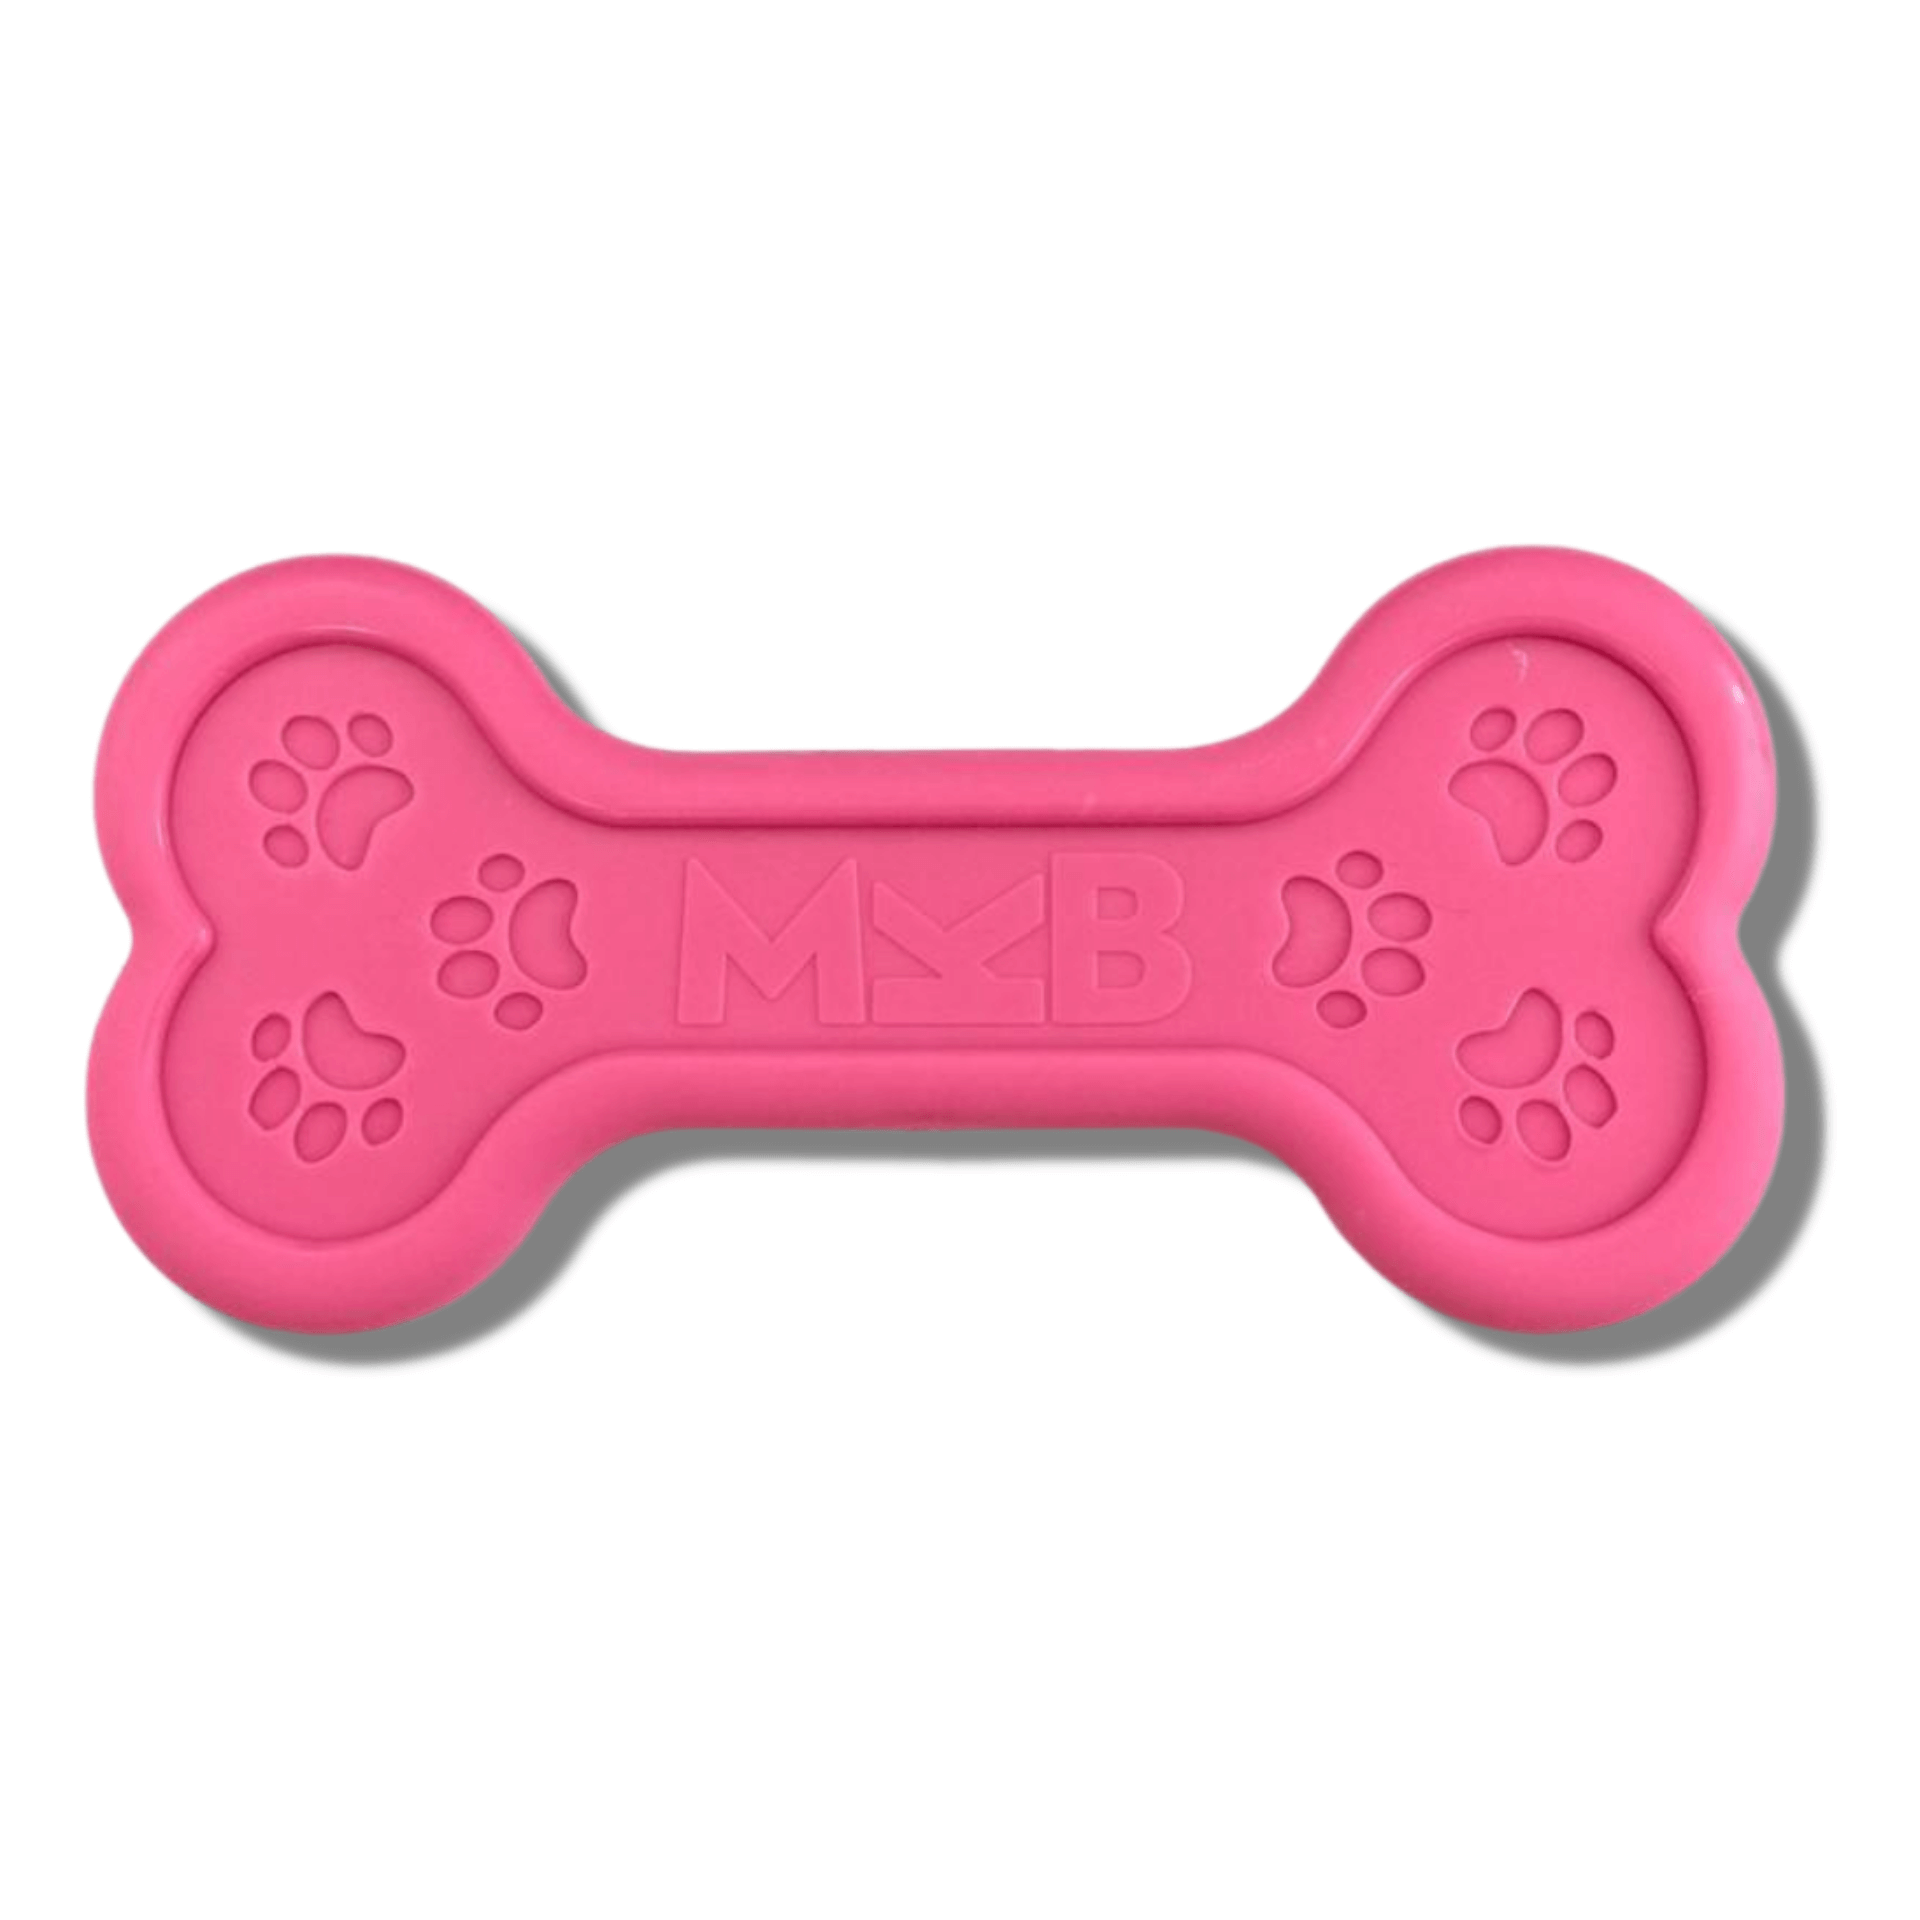 Power chewer indestructible dog toy, let's pawty